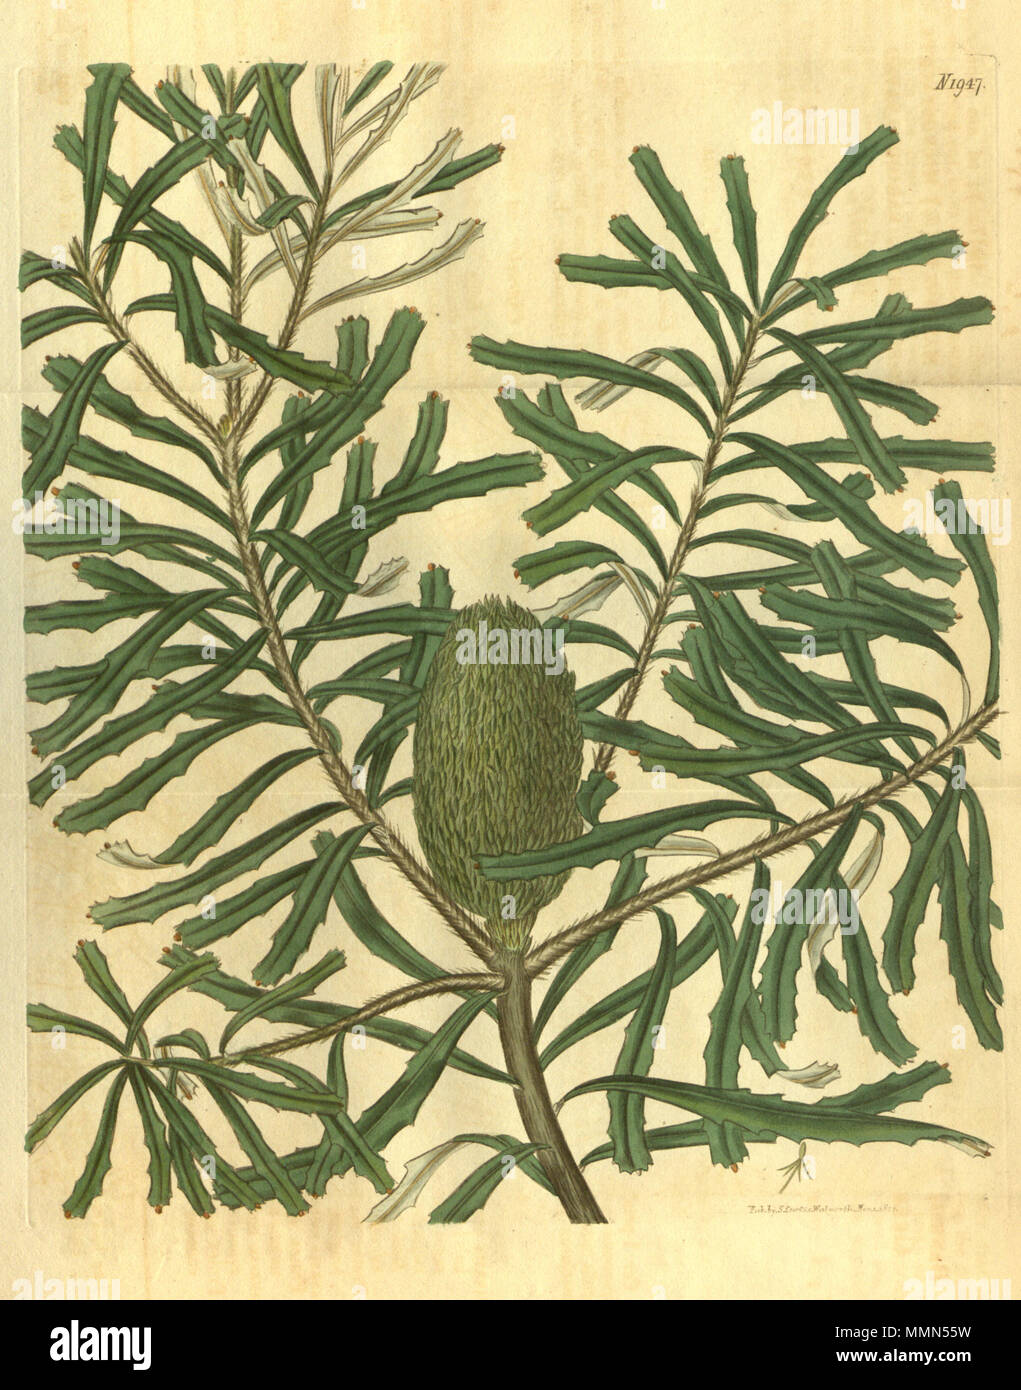 . This is an image of Plate 1947 from Volume 45 of Curtis's Botanical Magazine, entitled 'Banksia marginata (β) microstachya. Green-flowered various-leaved Banksia'. The plant depicted is Banksia marginata (Silver Banksia).  . 1843. The image has the signature of Samuel Curtis? and other indeterminate information. 94 Botanical Magazine 1947 Banksia marginata Stock Photo